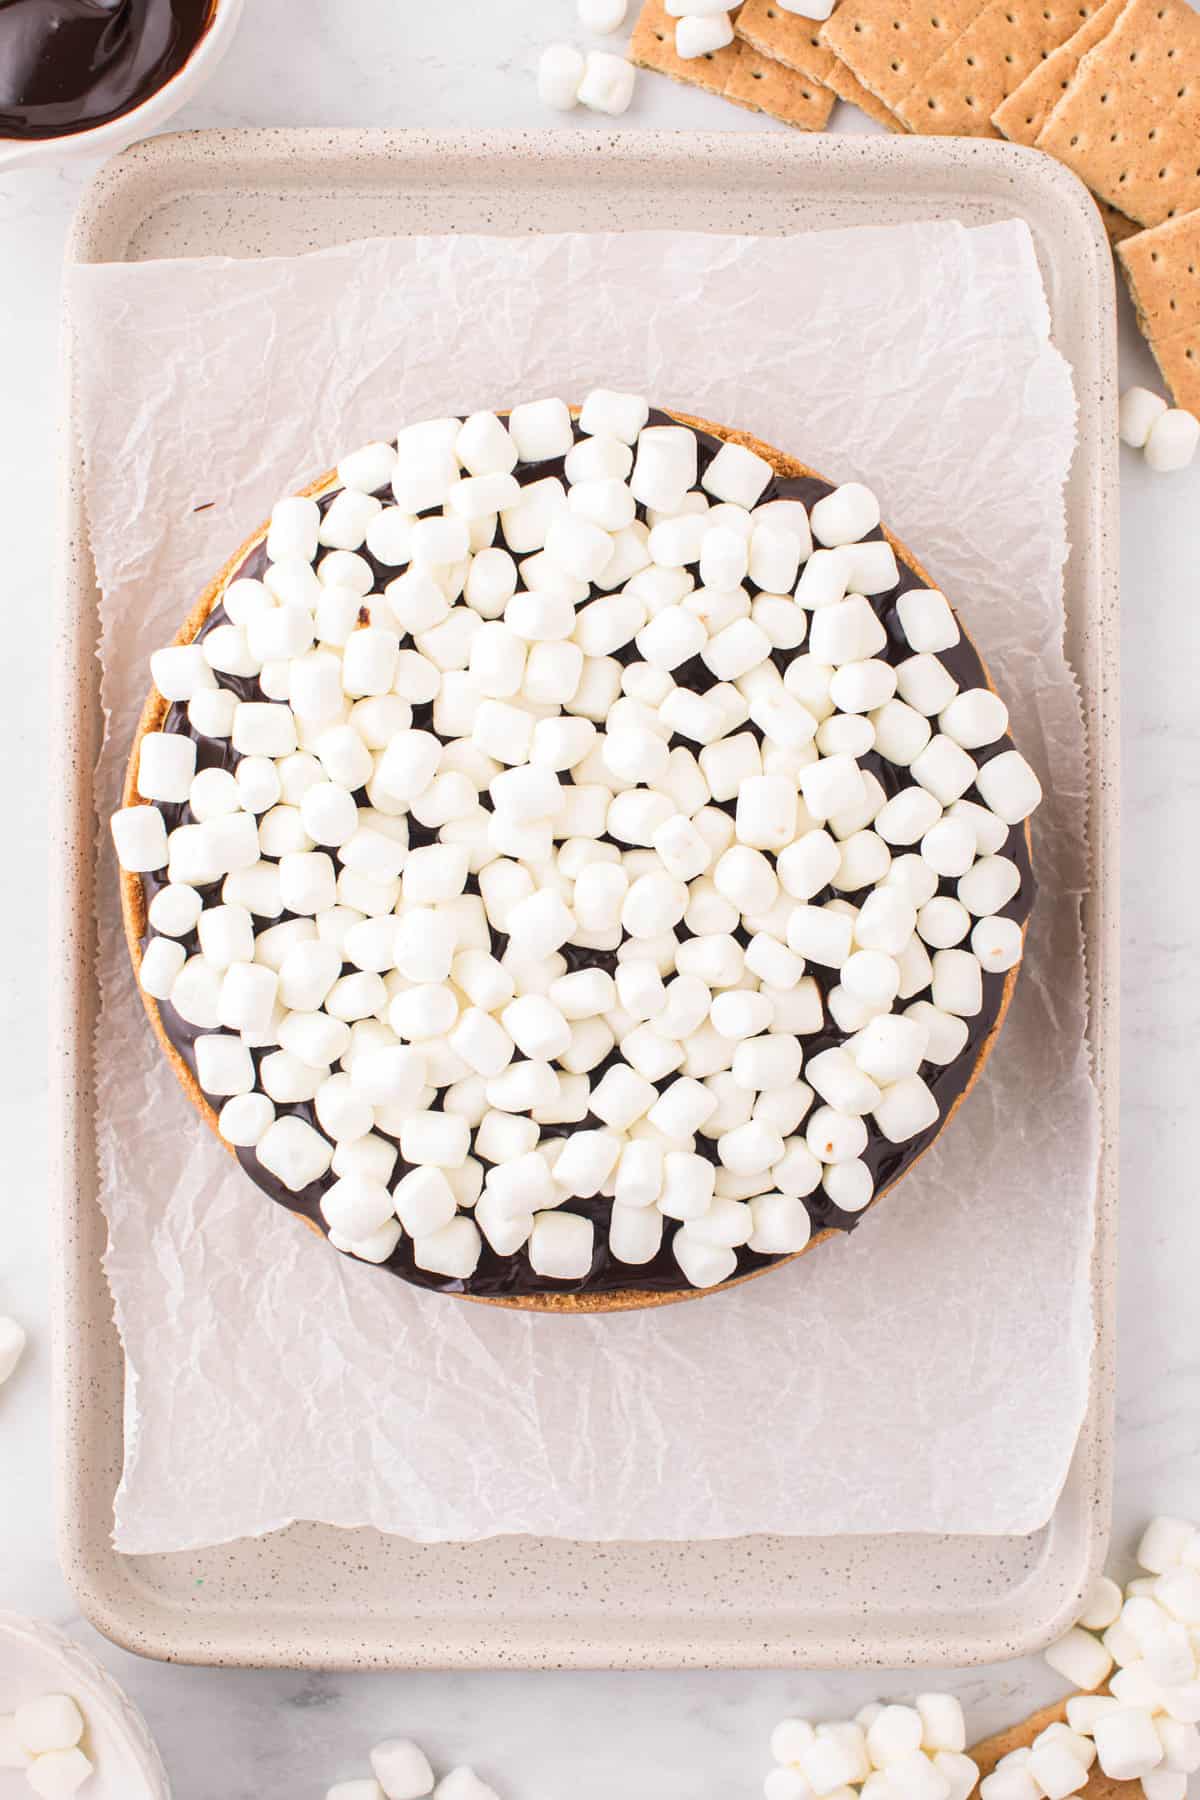 Topping Cheesecake with Mini Marshmallows for S'mores Cheesecake Recipe